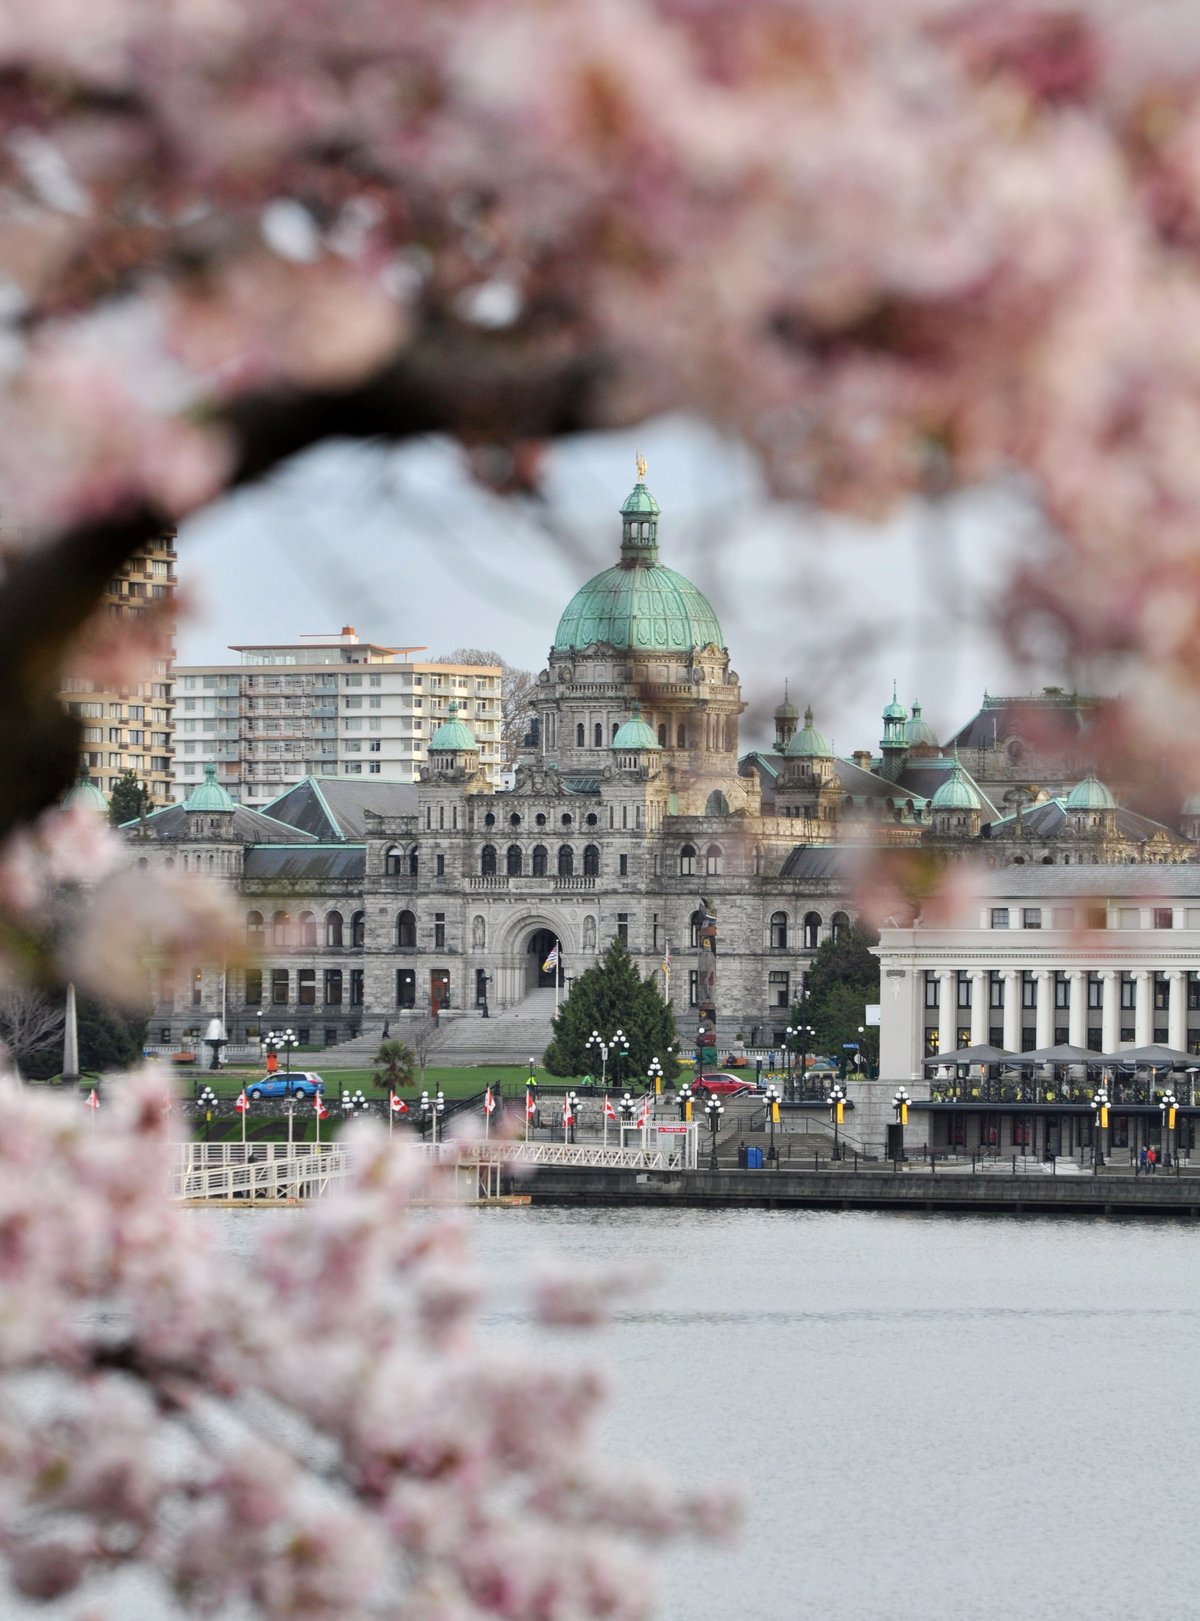 View of the parliament buildings from across the harbour. The image is framed by pink cherry blossoms in the foreground.